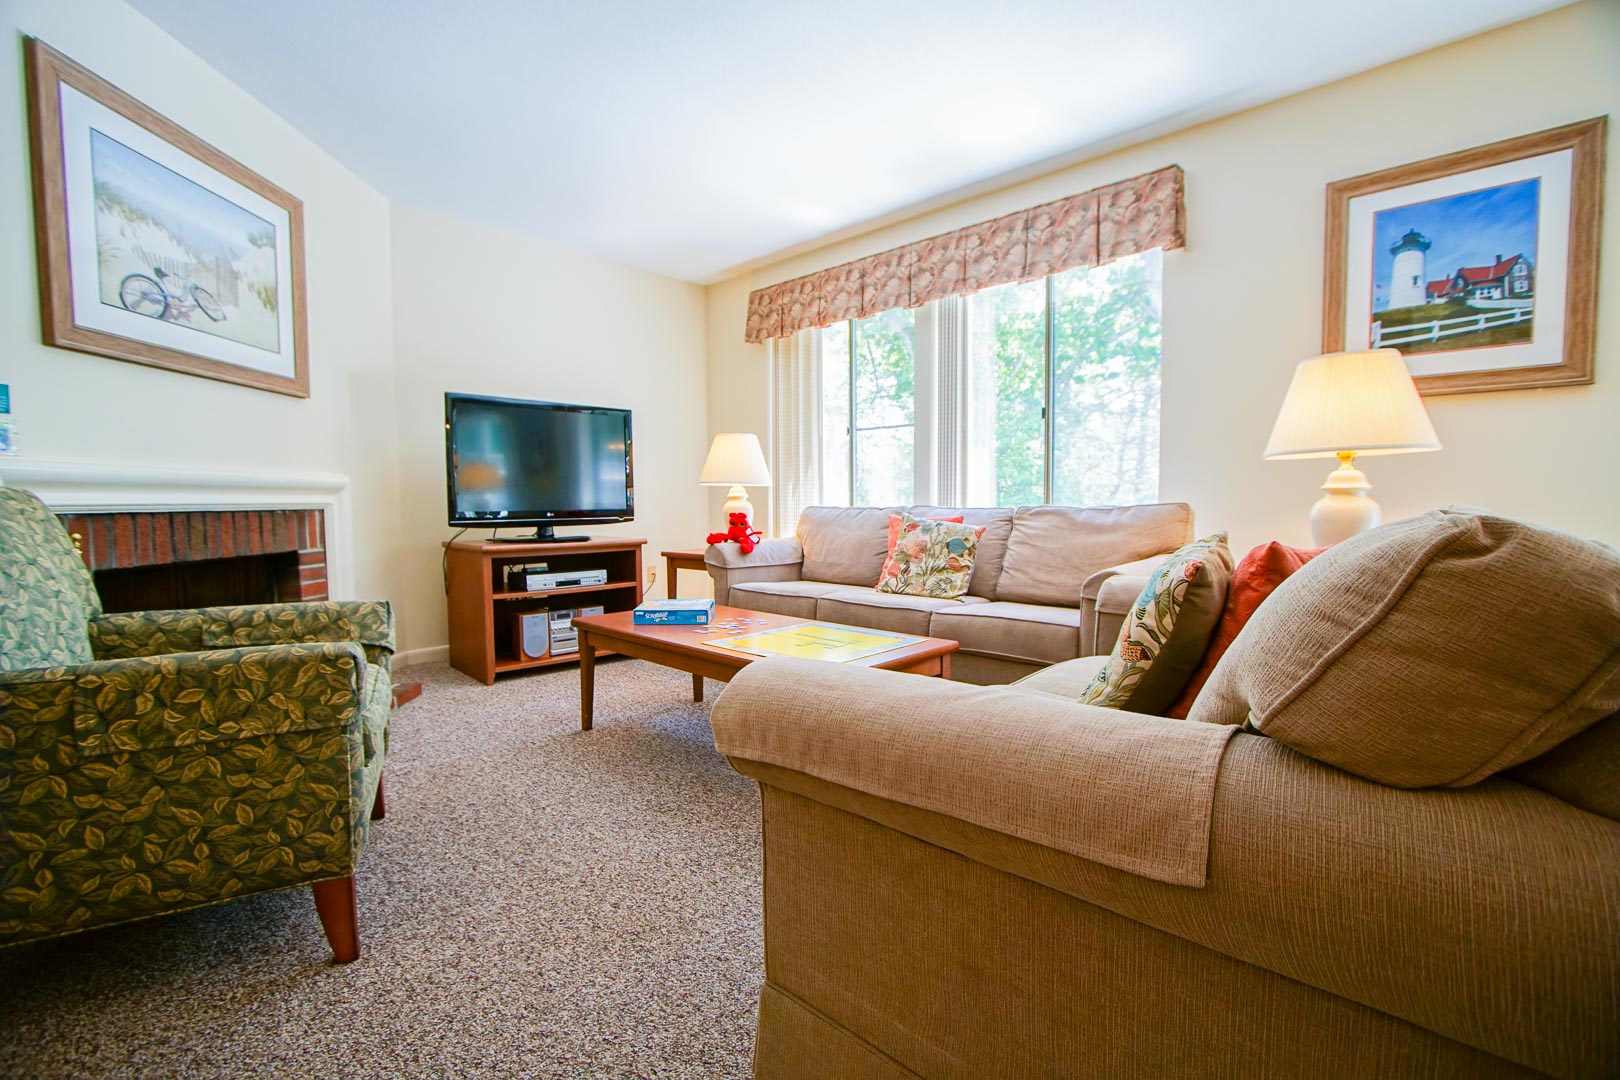 A spacious living room area at VRI's Brewster Green Resort in Massachusetts.